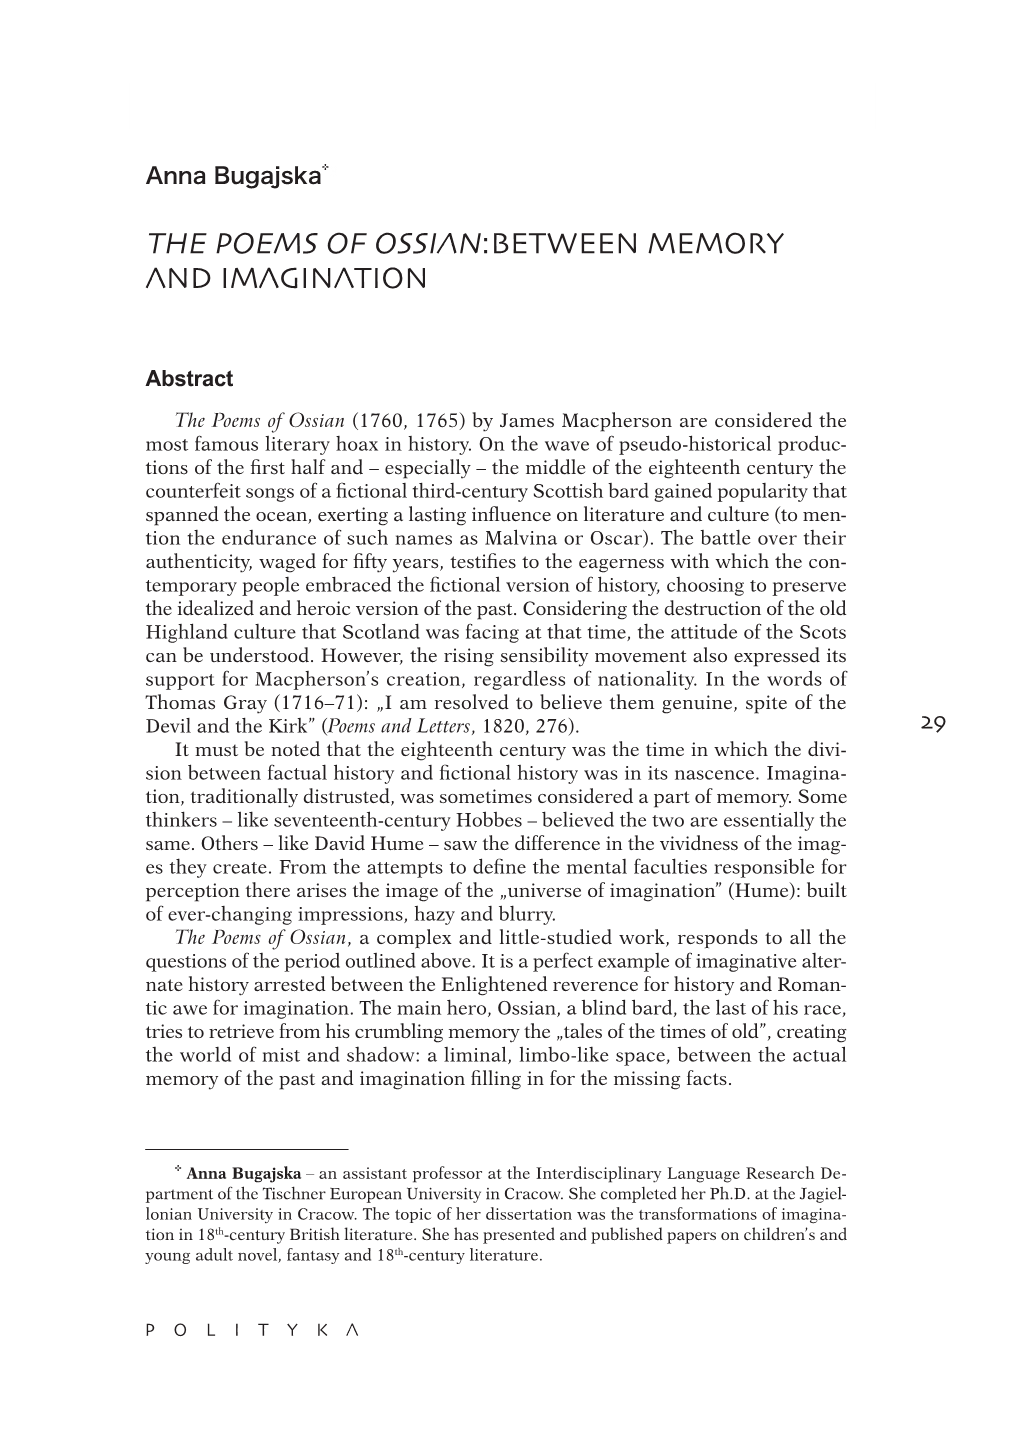 The Poems of Ossian:Between Memory and Imagination